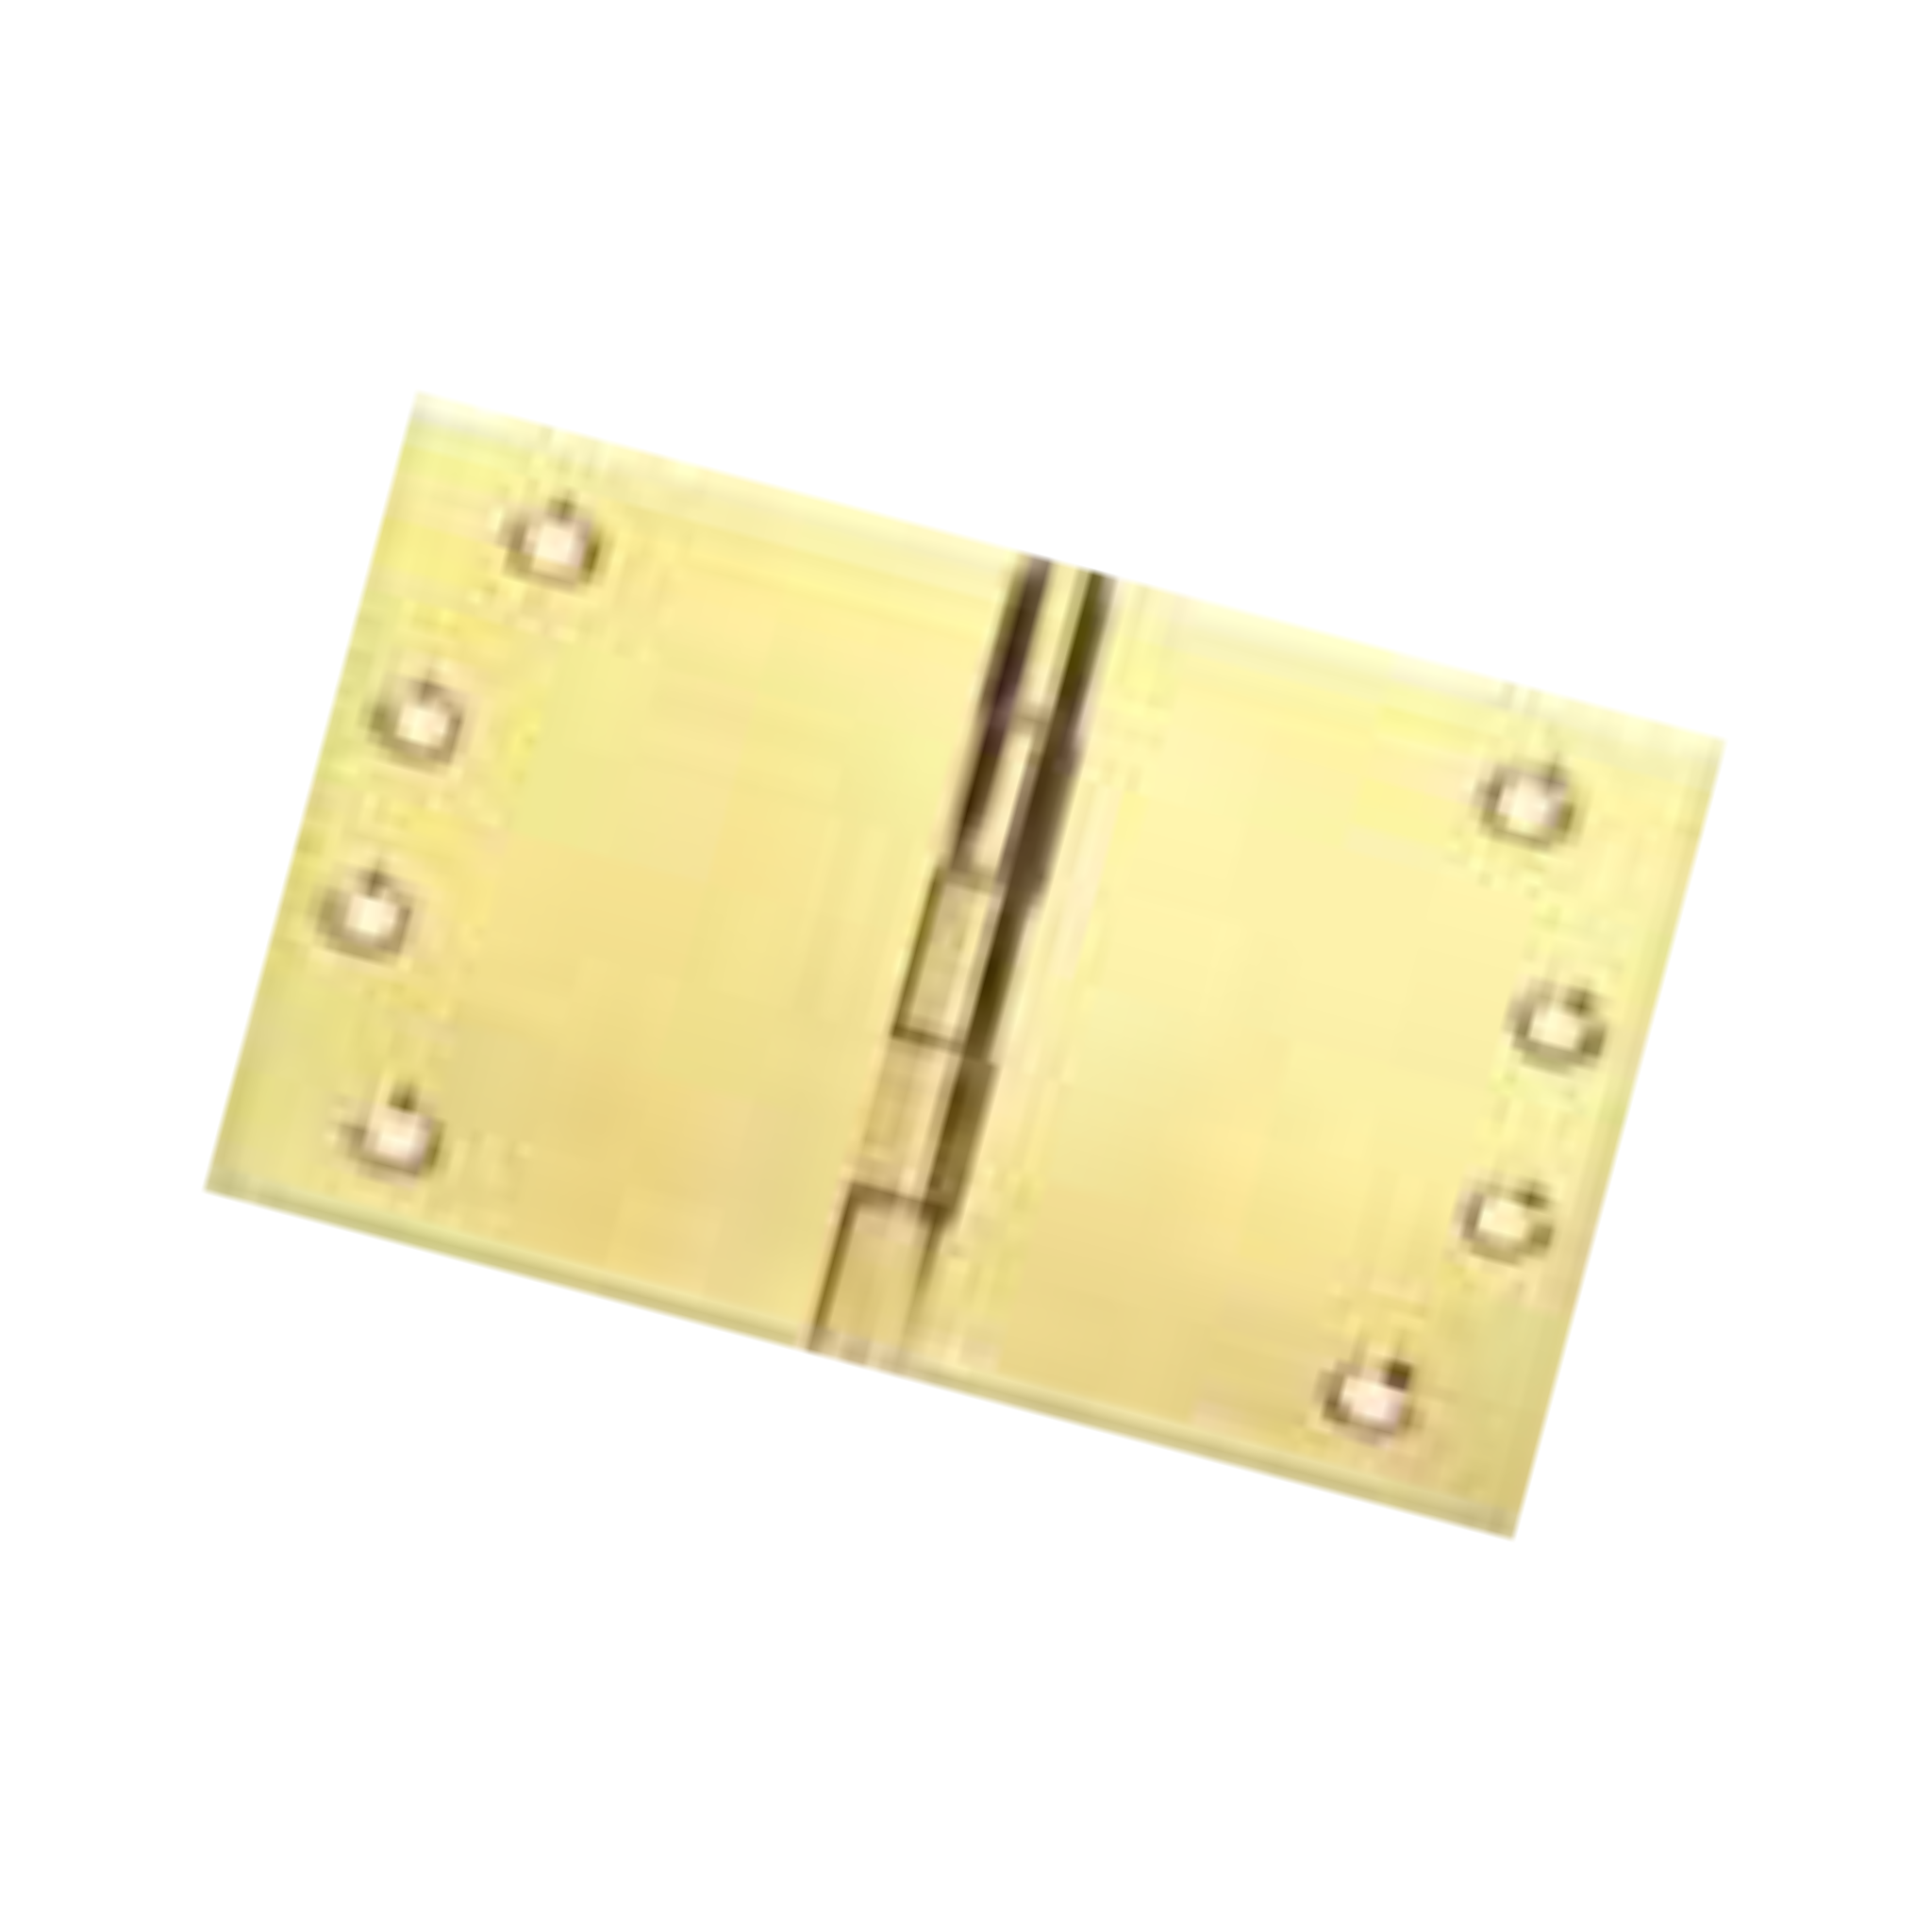 FH200X3, Projection Hinge, 2 x Hinges (1 Pair), 100mm (h) x 200mm (w) x 3.5mm (t), Satin, CISA